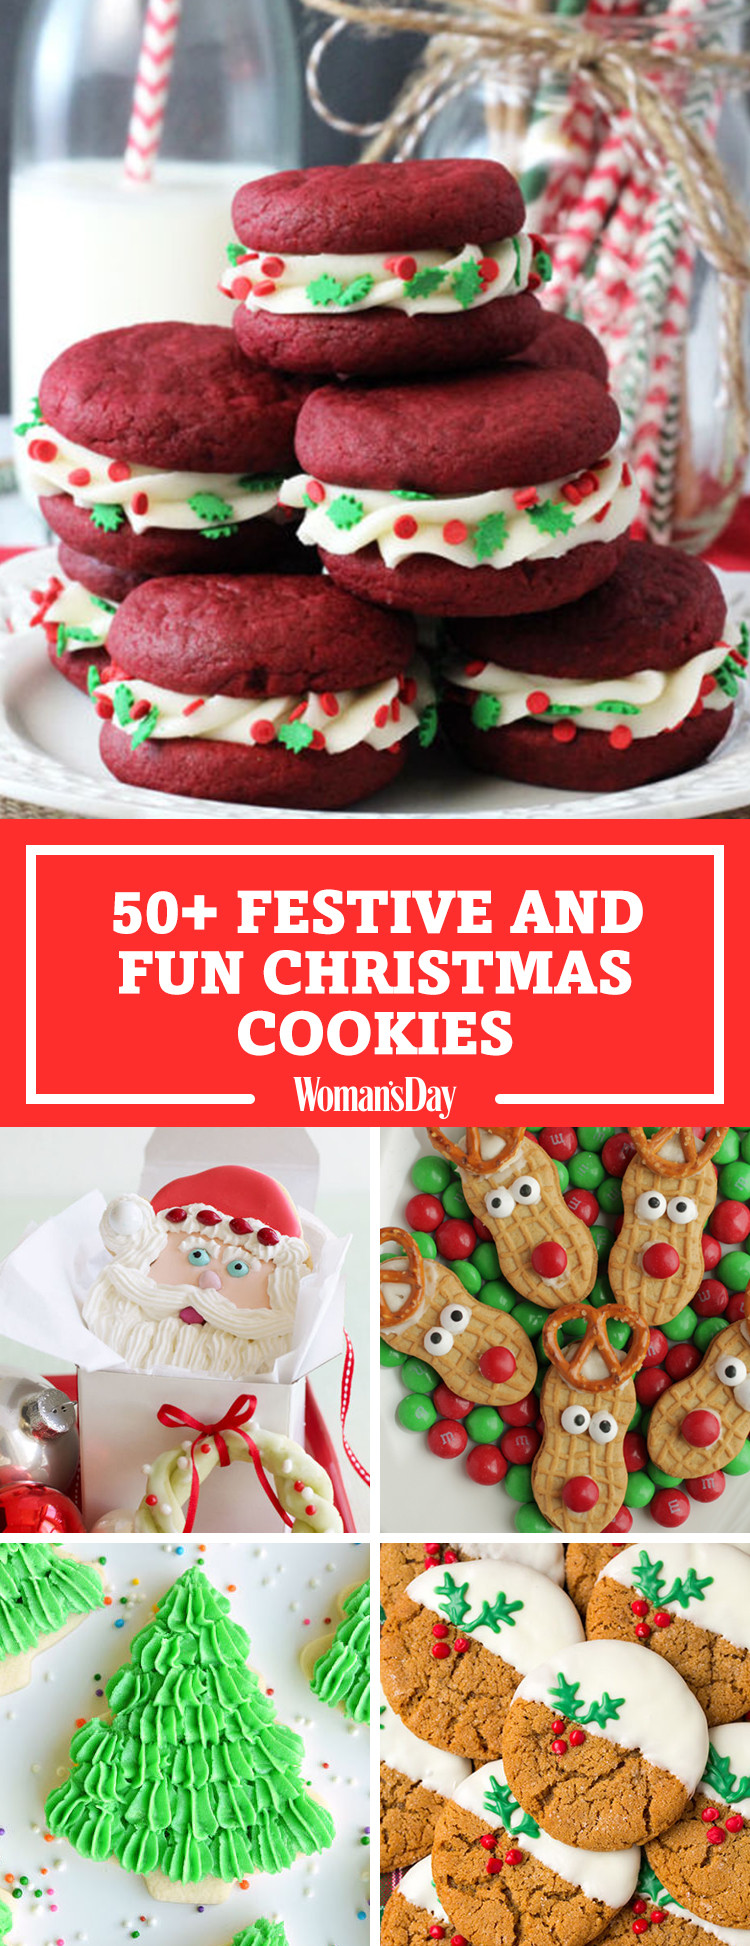 Fun Christmas Cookies Recipe
 59 Easy Christmas Cookies Best Recipes for Holiday